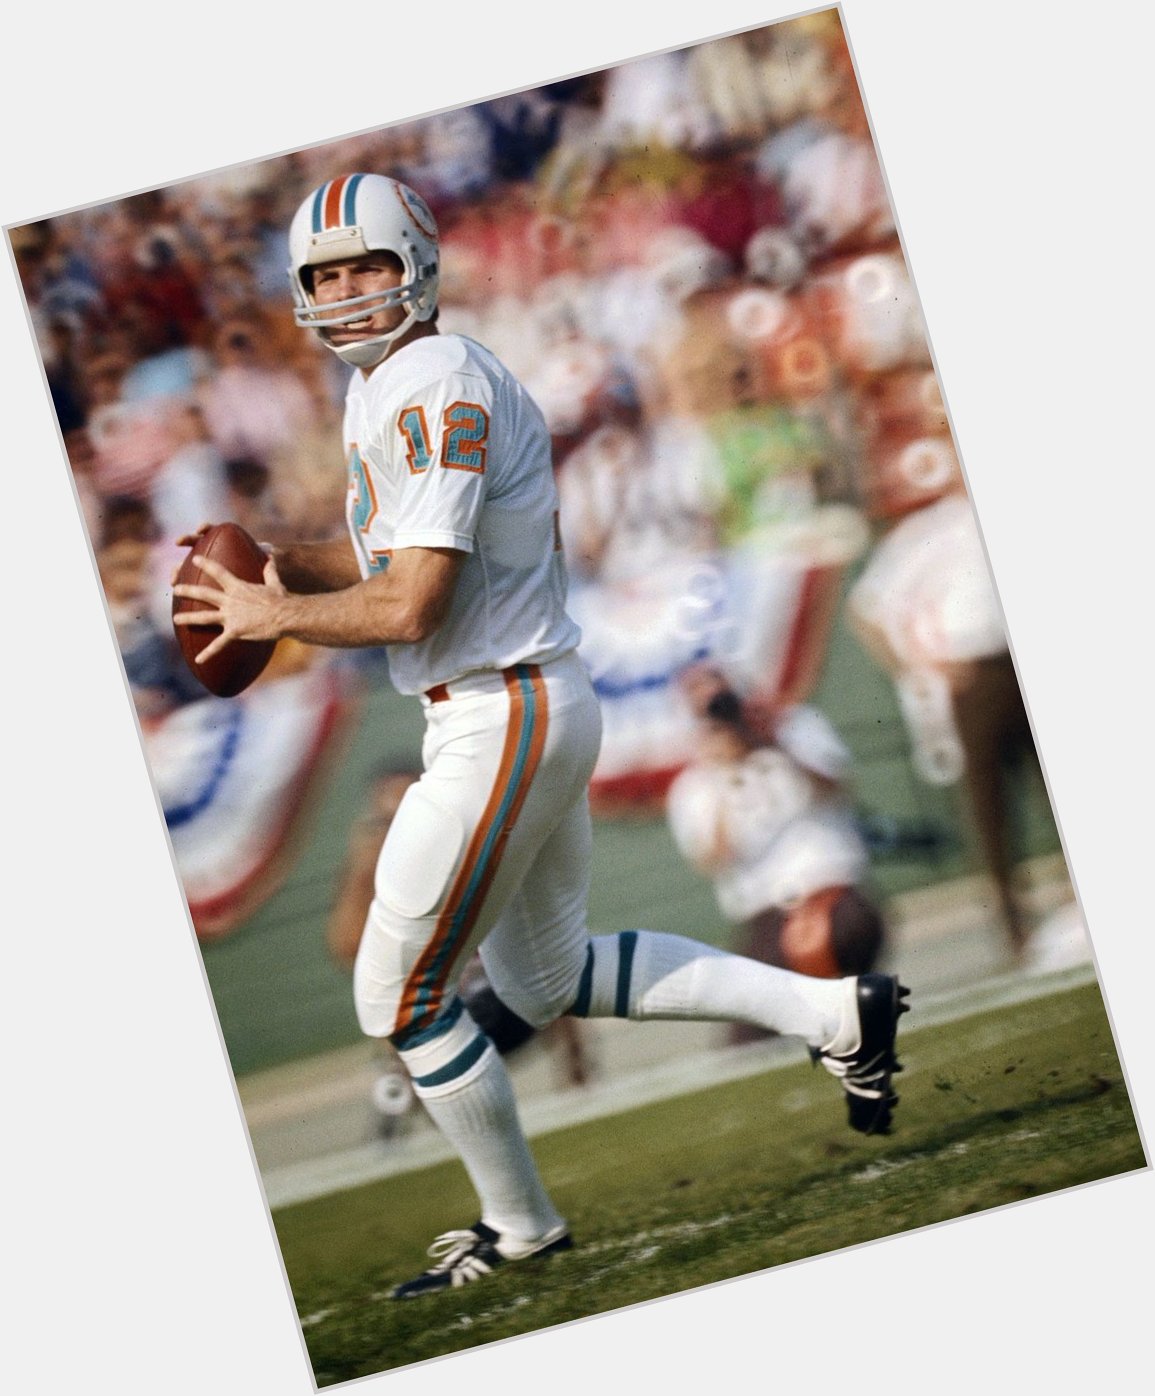 Happy Birthday to Bob Griese, who turns 73 today! 